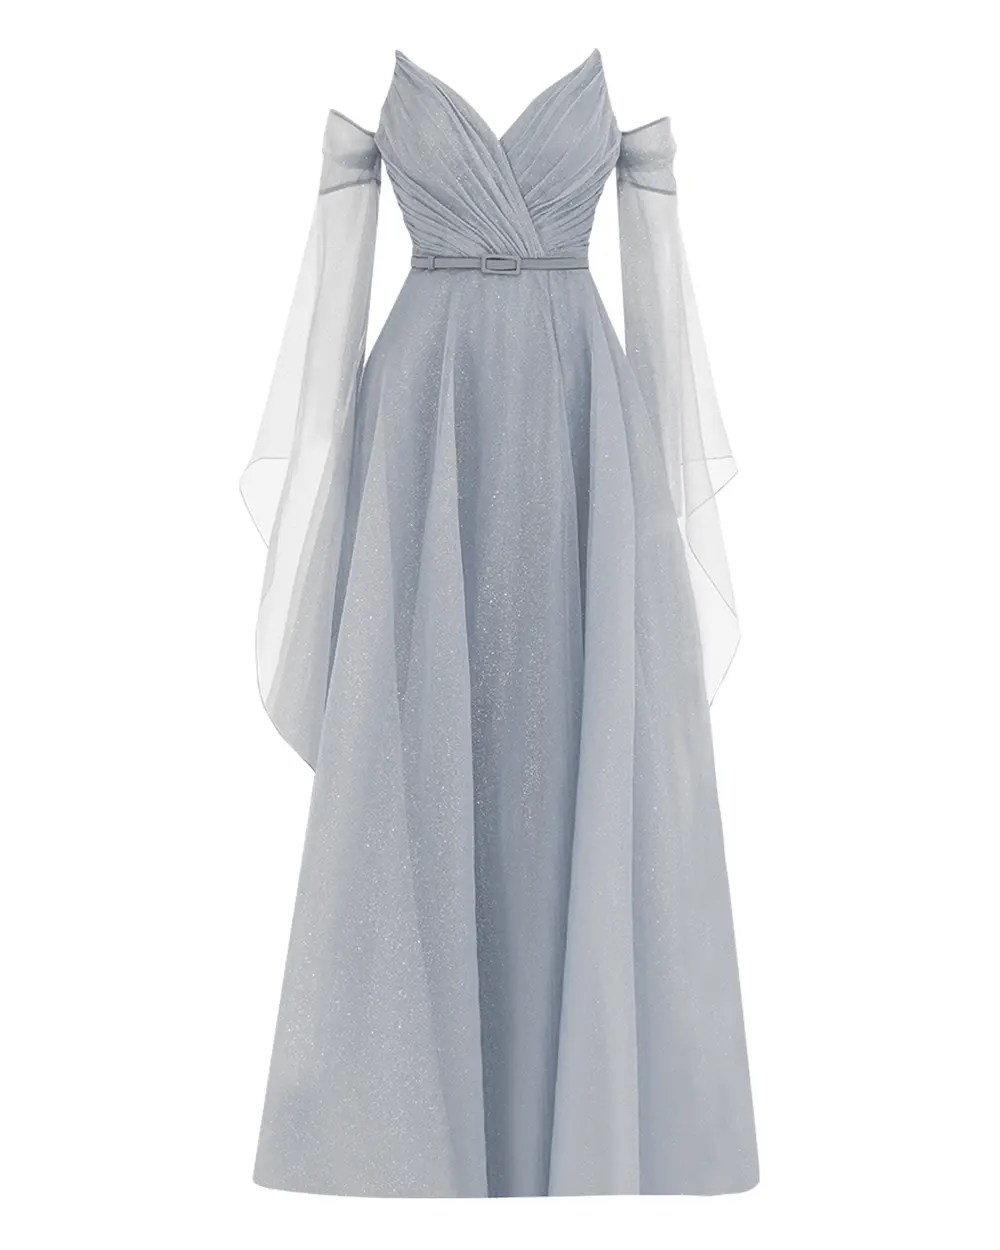 Dovetail Collar Detachable Sleeves Silvery Evening Dress